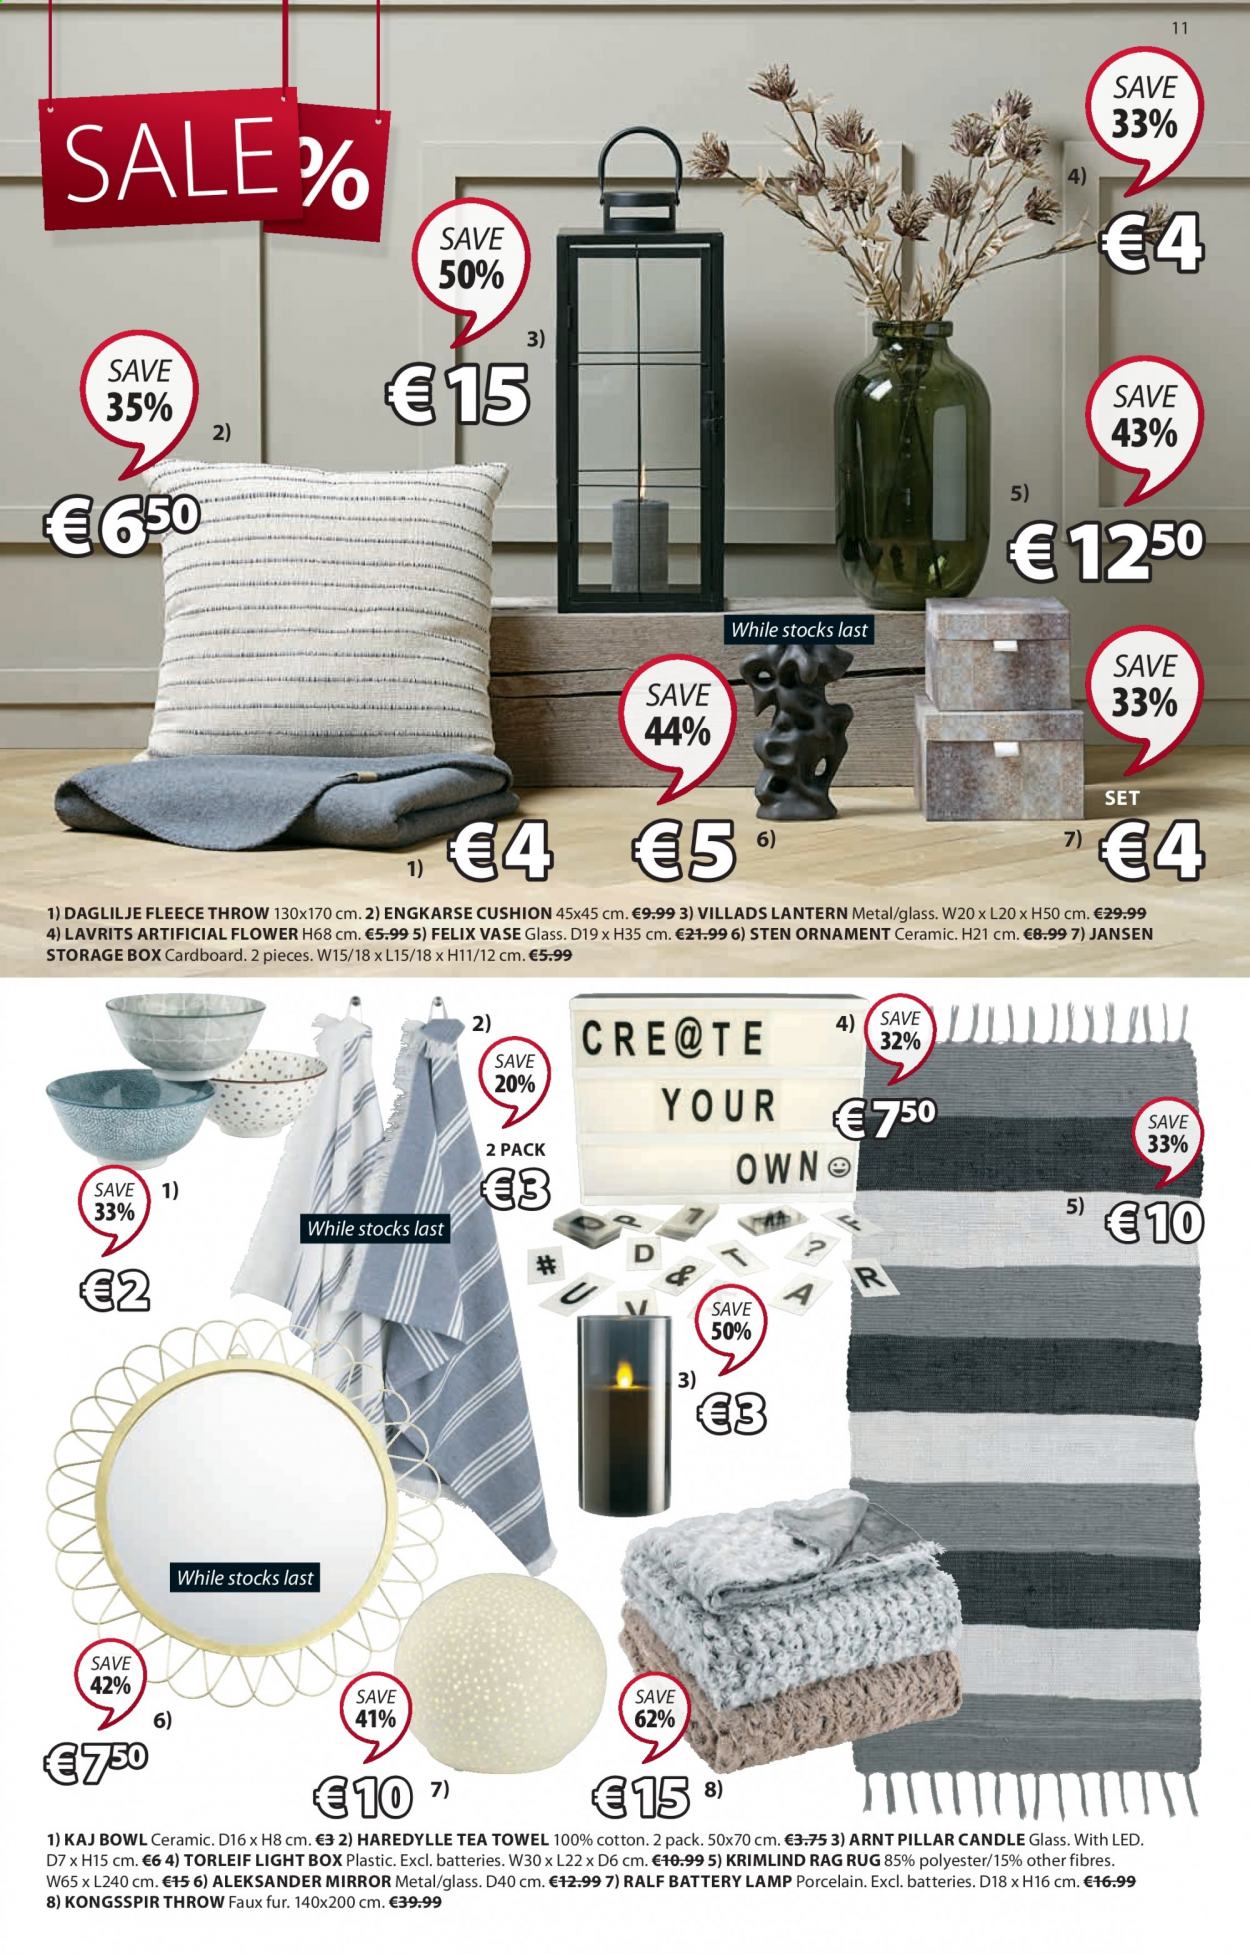 thumbnail - JYSK offer  - 01.07.2021 - 14.07.2021 - Sales products - storage box, cushion, mirror, lantern, artificial flowers, vase, bowl, candle, tea towels, fleece throw, lamp, rug. Page 11.